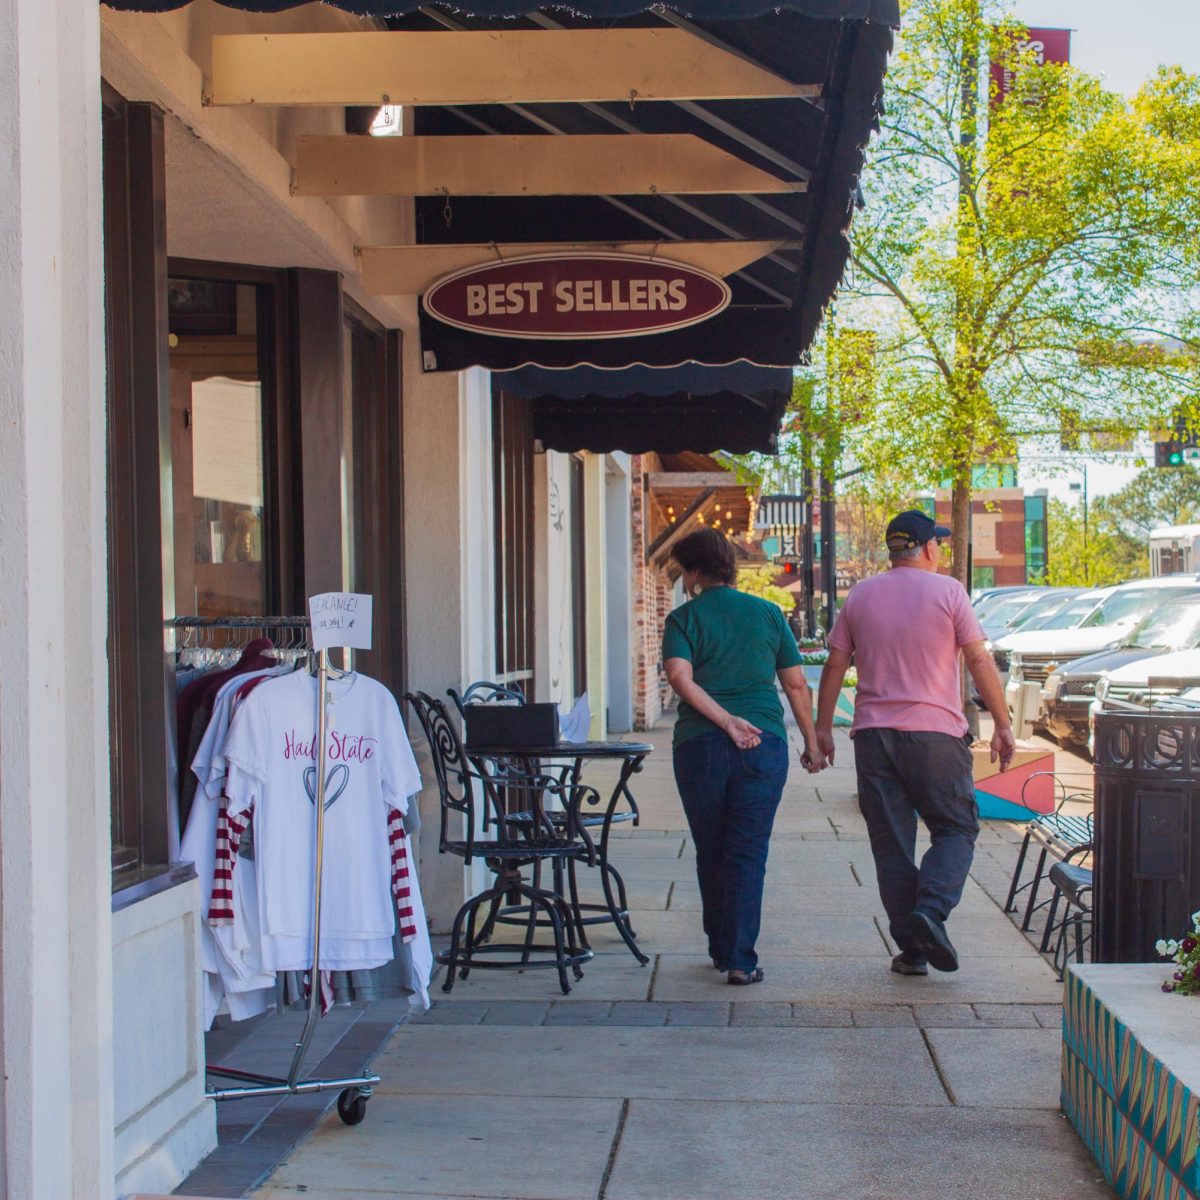 It always feels alive: Starkville wins Best Small Town in the South